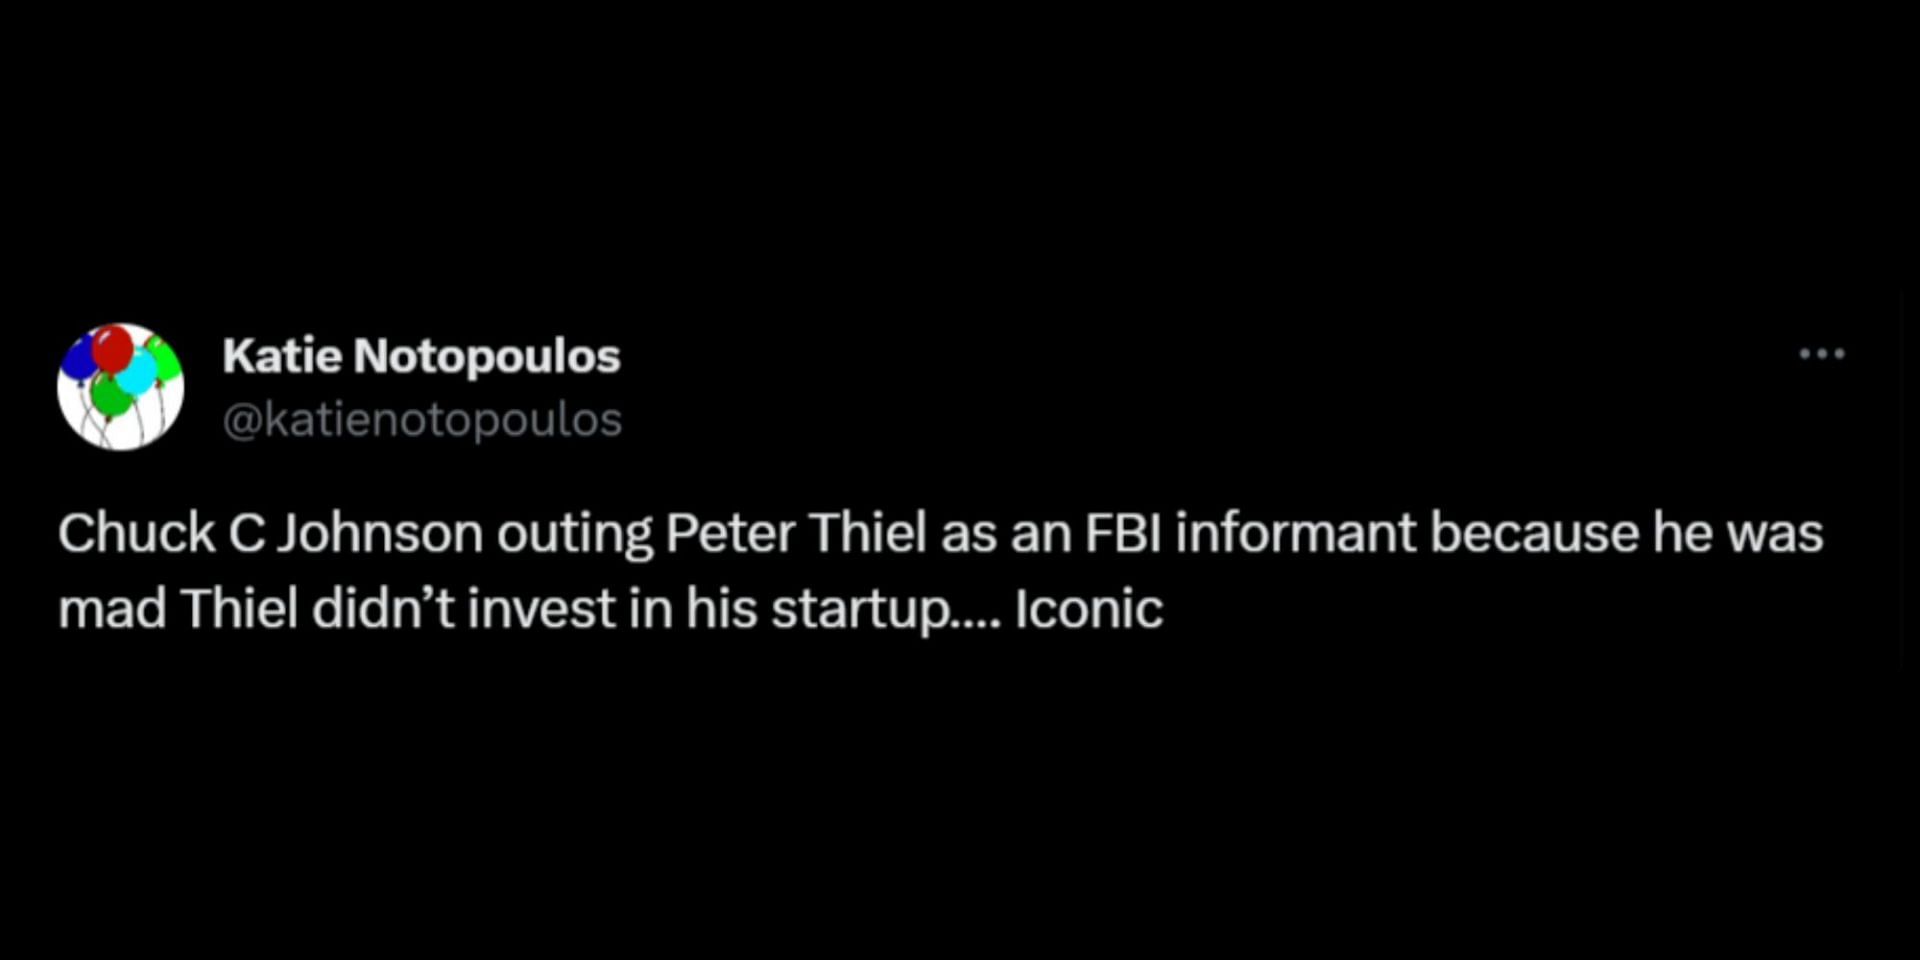 Charles Johnson outed Peter Thiel&#039;s status as an FBI informant. (Image via X/@Katie Notopoulos)